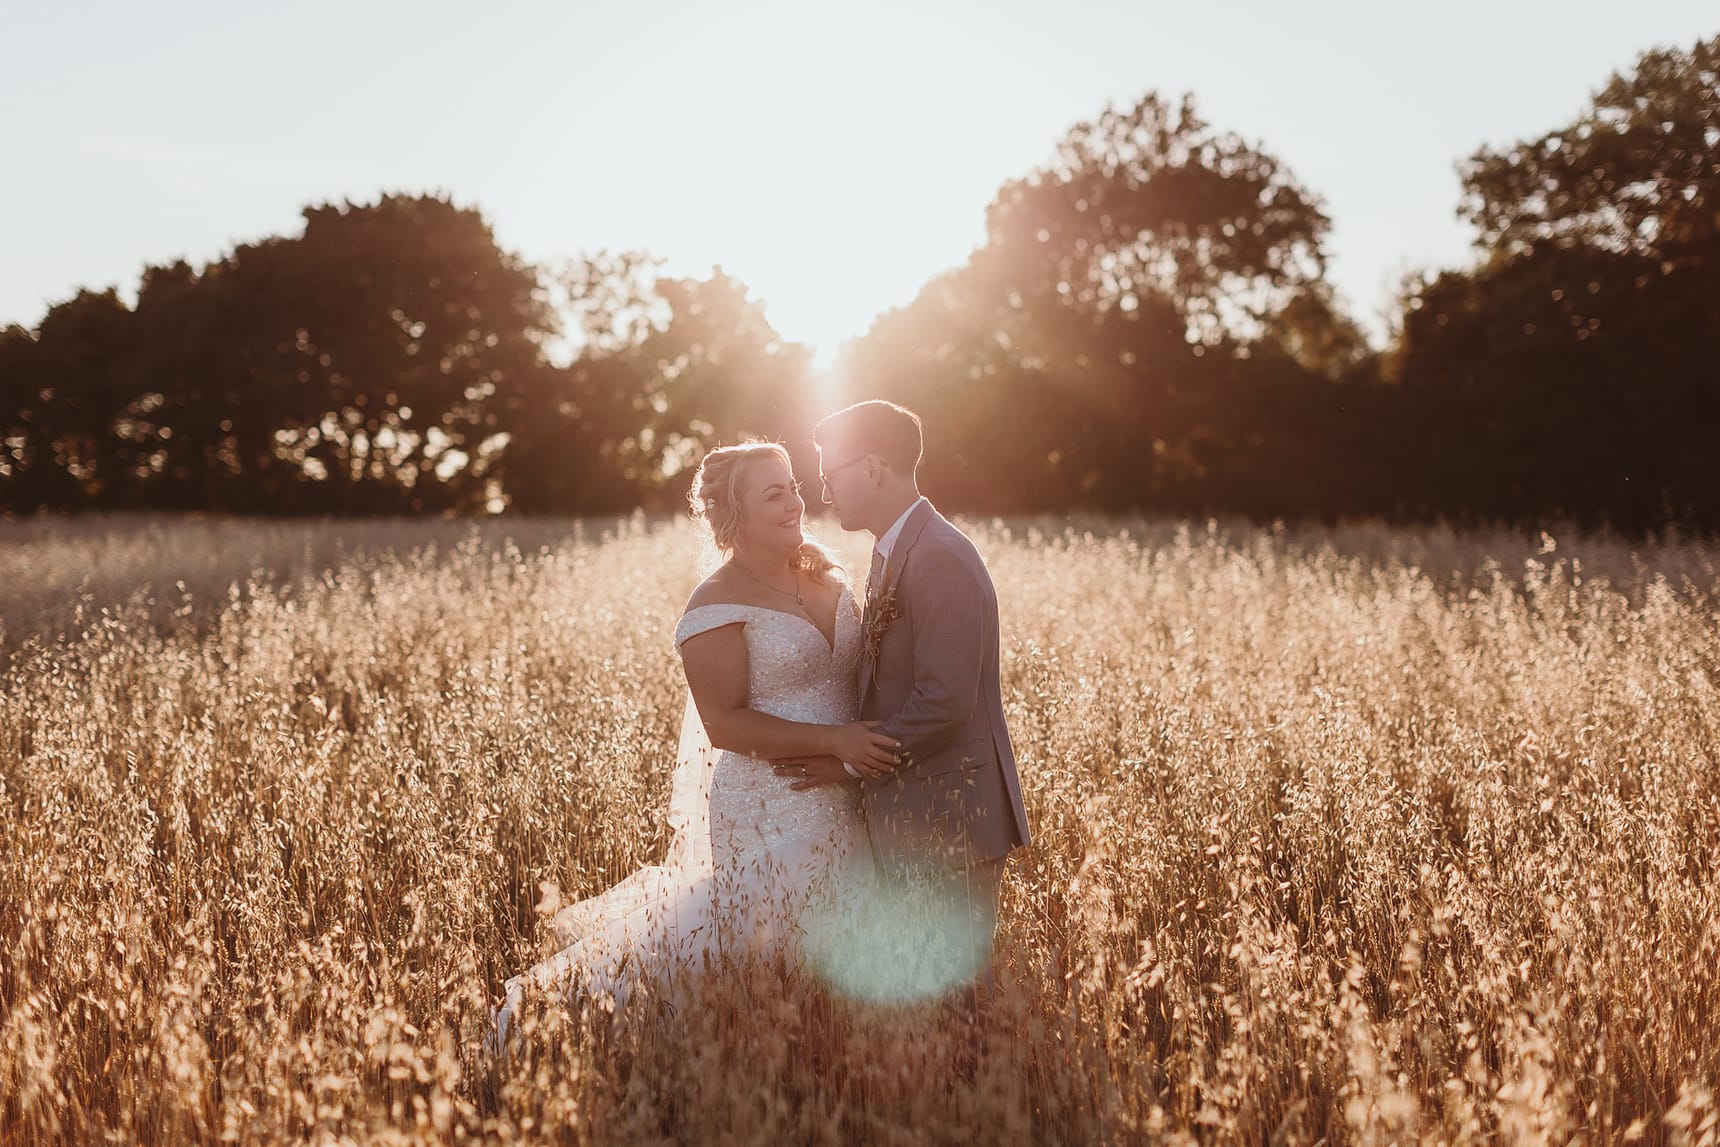 Sunset photo of a bride and groom in the cornfield with warm light